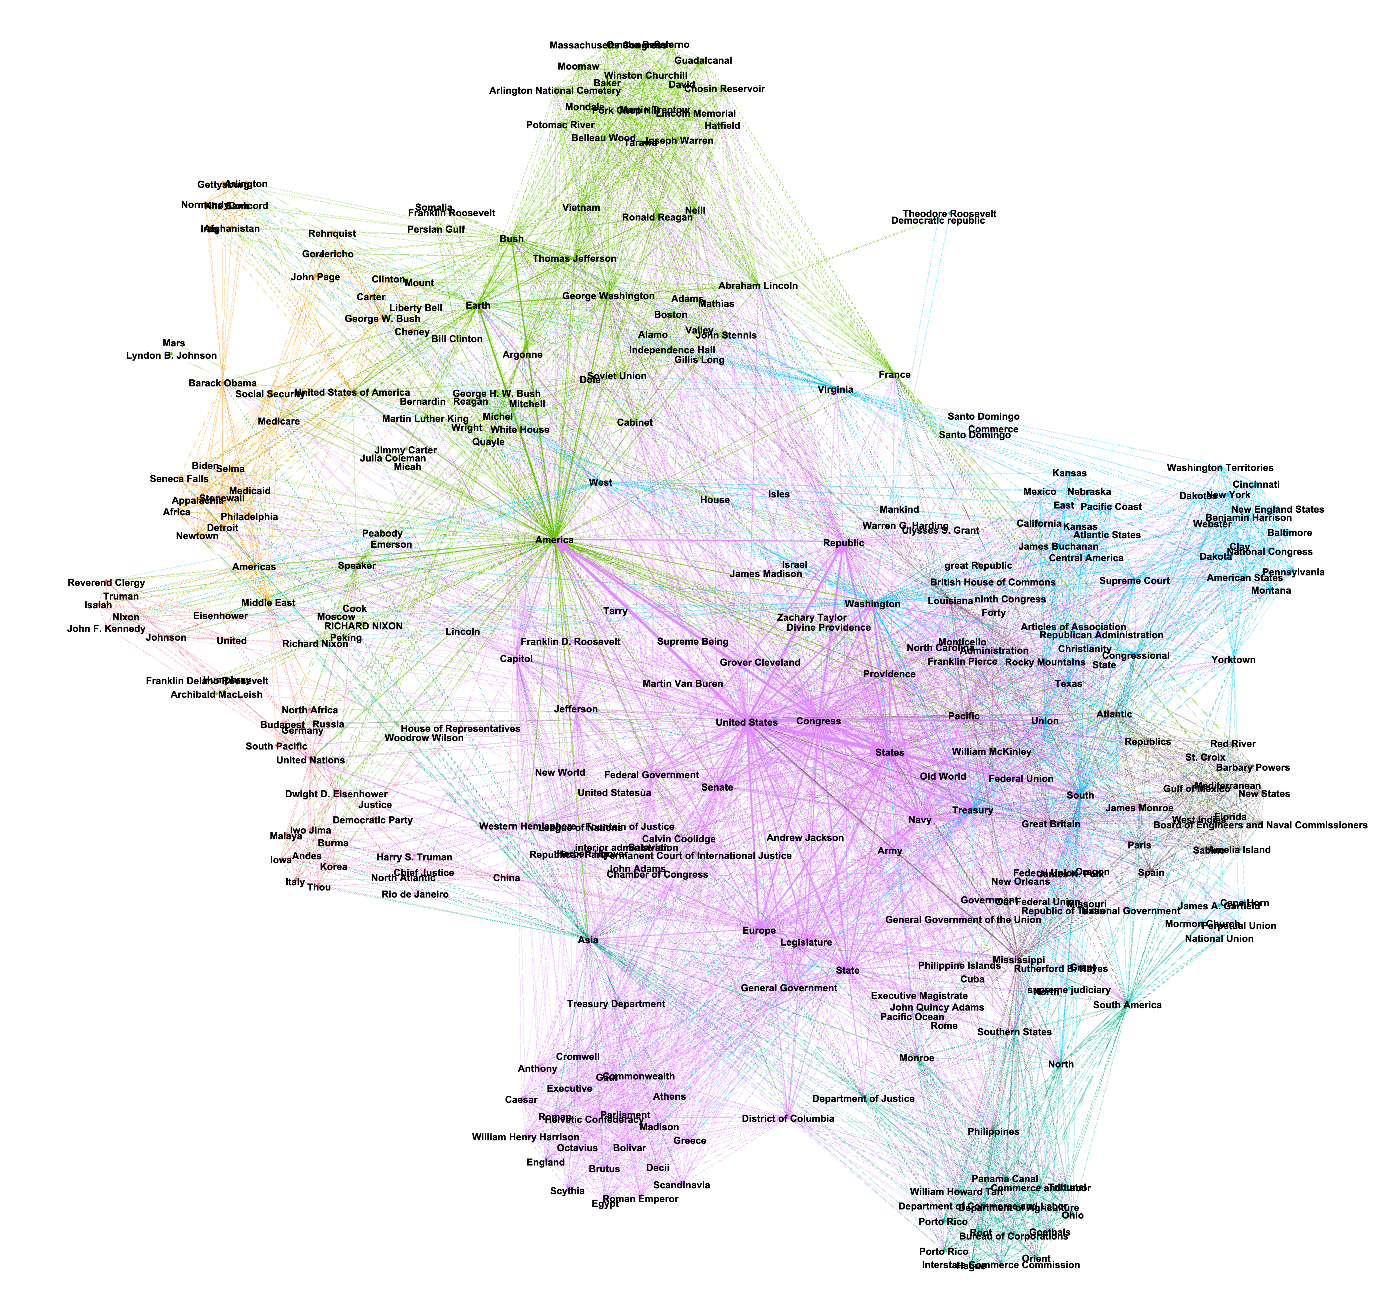 full network graph of inaugural speech named entities